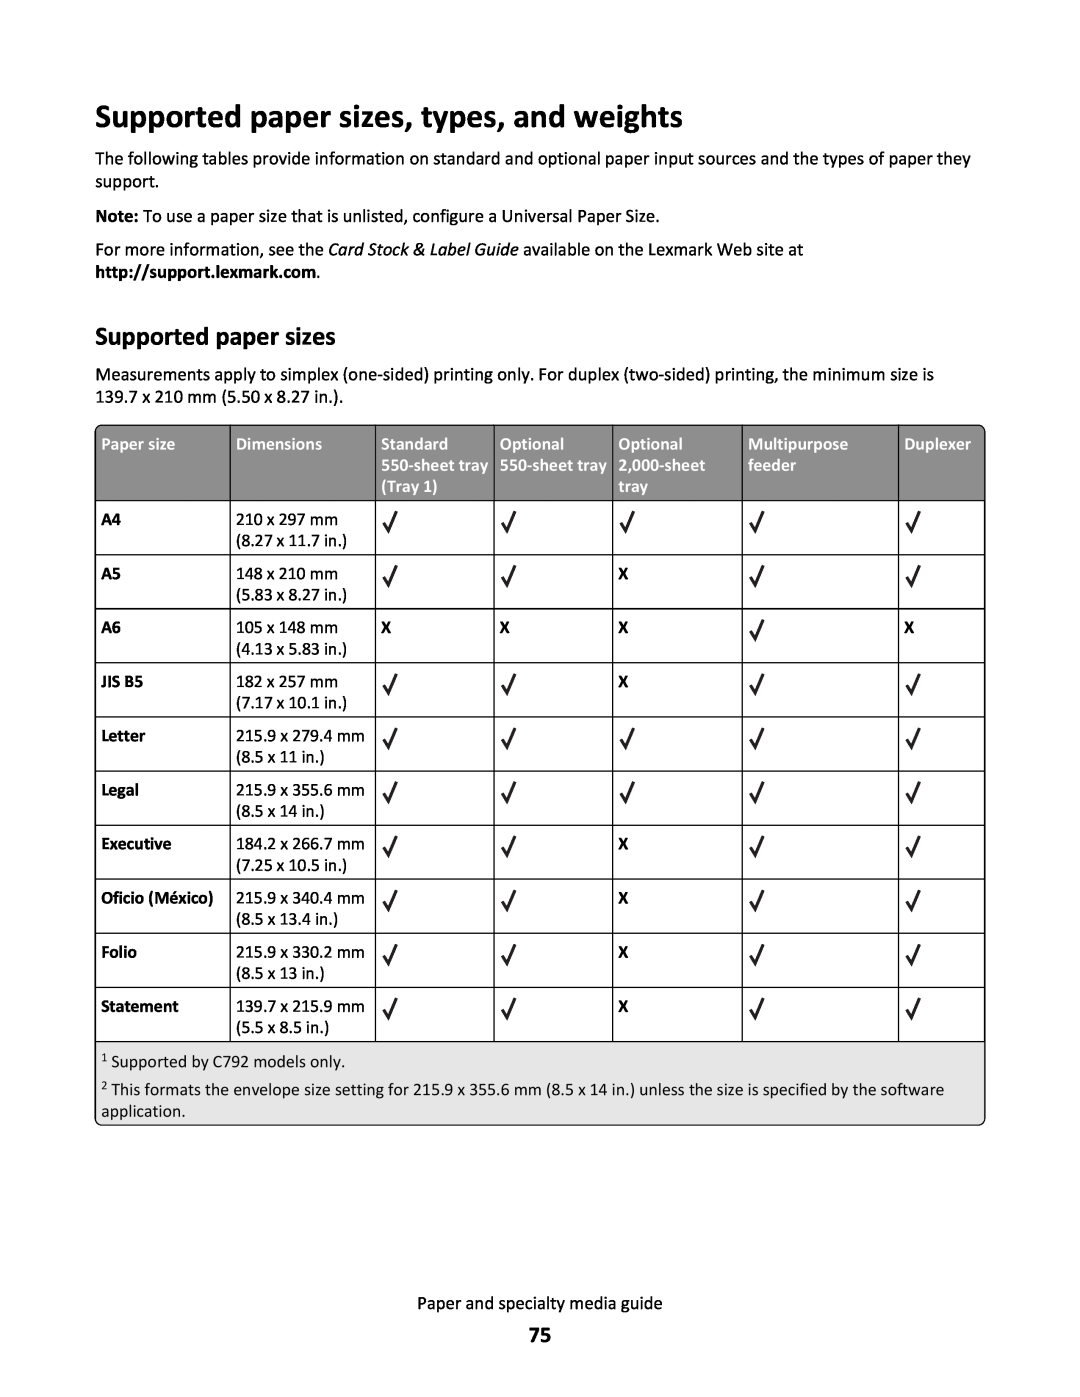 Lexmark C790 manual Supported paper sizes, types, and weights 